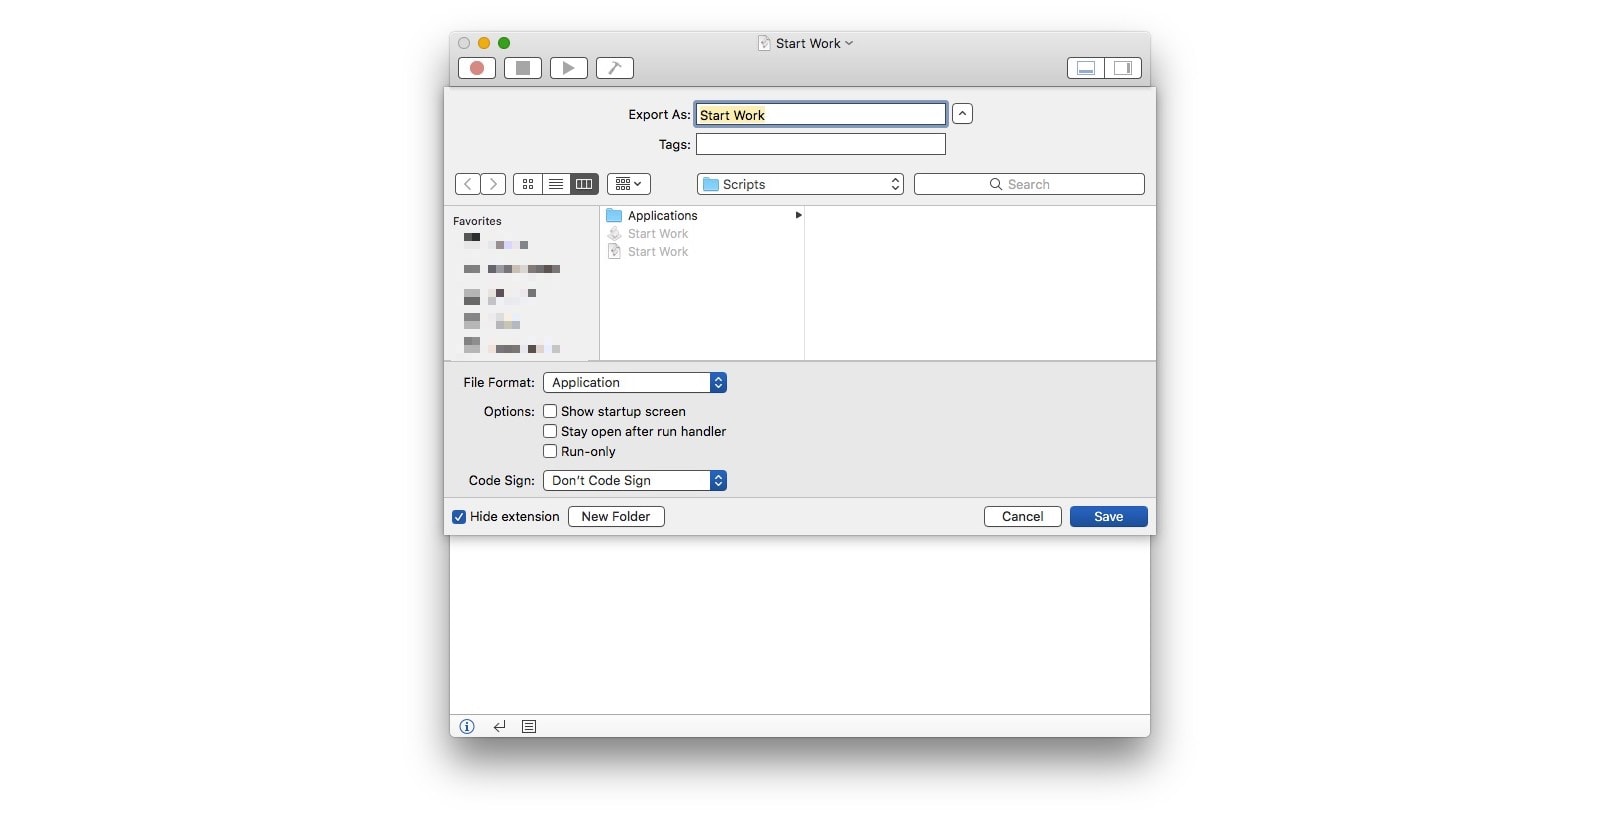 Choose 'Application' from the File Tormat menu in the export dialog box.